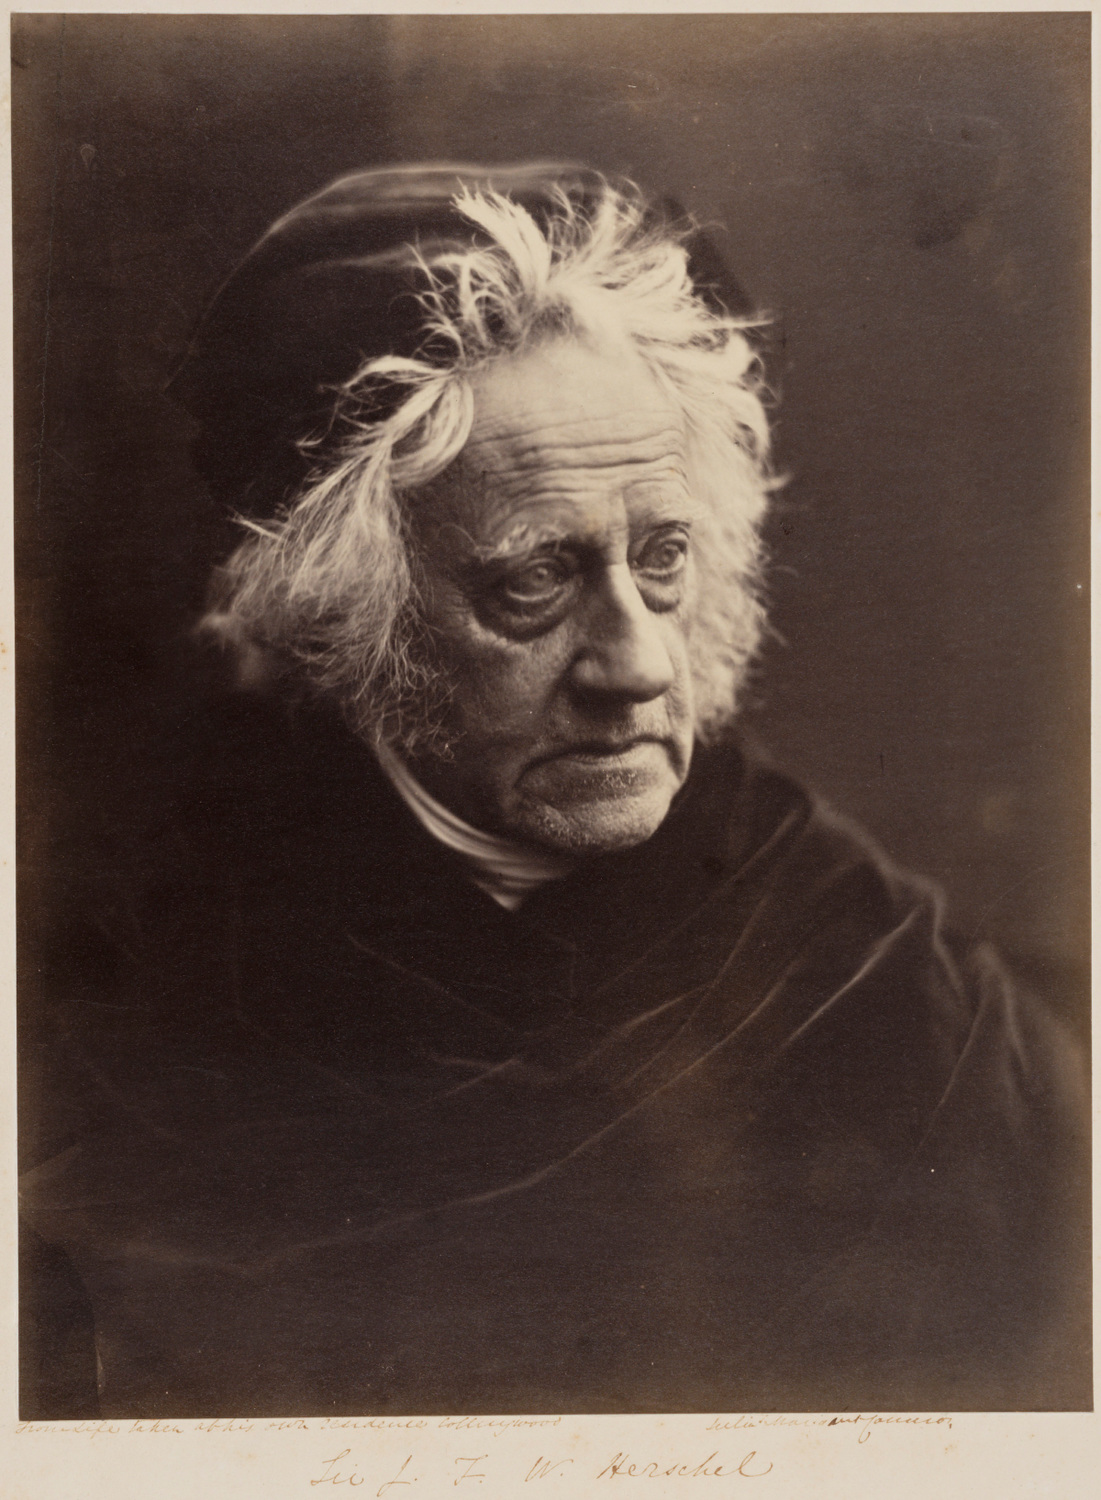 A black and white photograph of Sir John Herschel. He wears a cap, looks to his left, and is photographed from the chest up.